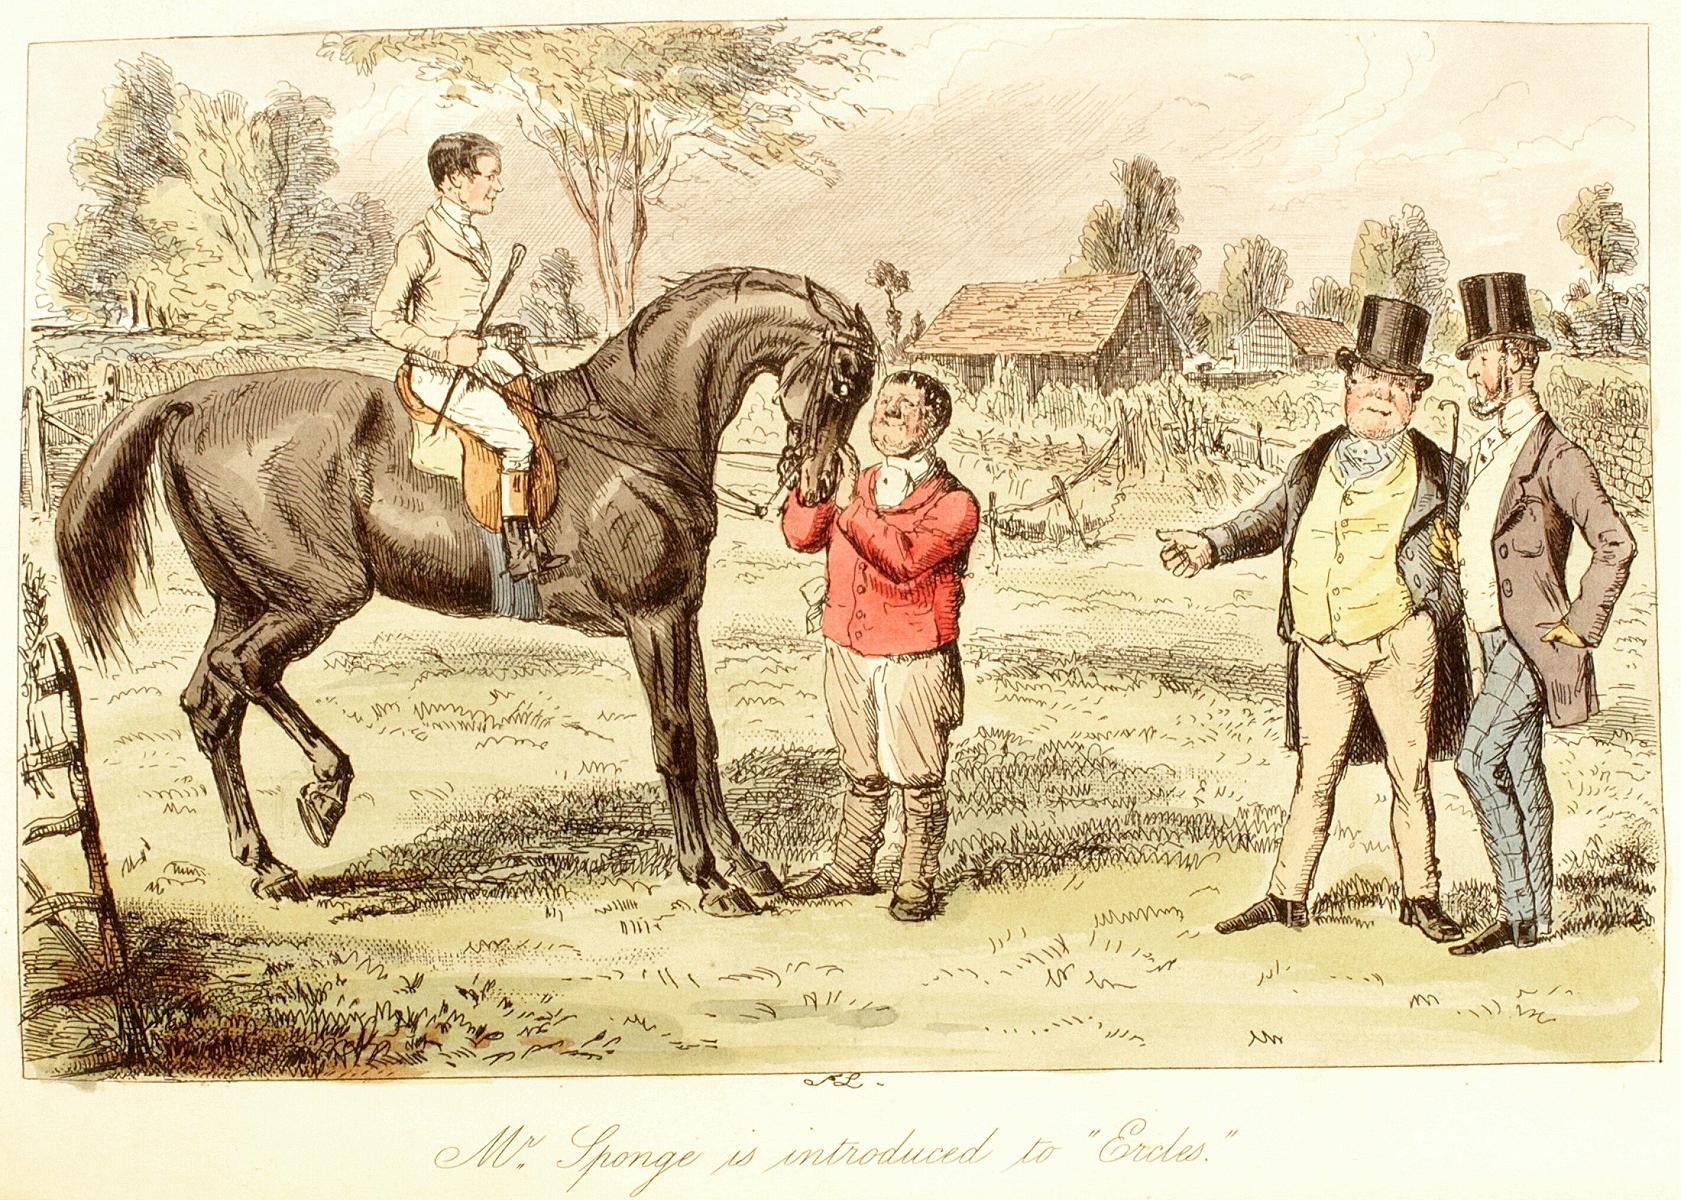 AUTHOR: SURTEES, Robert Smith. 

TITLE: Mr. Sponge's Sporting Tour.

PUBLISHER: London: Bradbury and Evans, 1853.

DESCRIPTION: FIRST EDITION IN THE ORIGINAL 12/13 PARTS, 13 hand-coloured etched plates by John Leech, wood-engraved